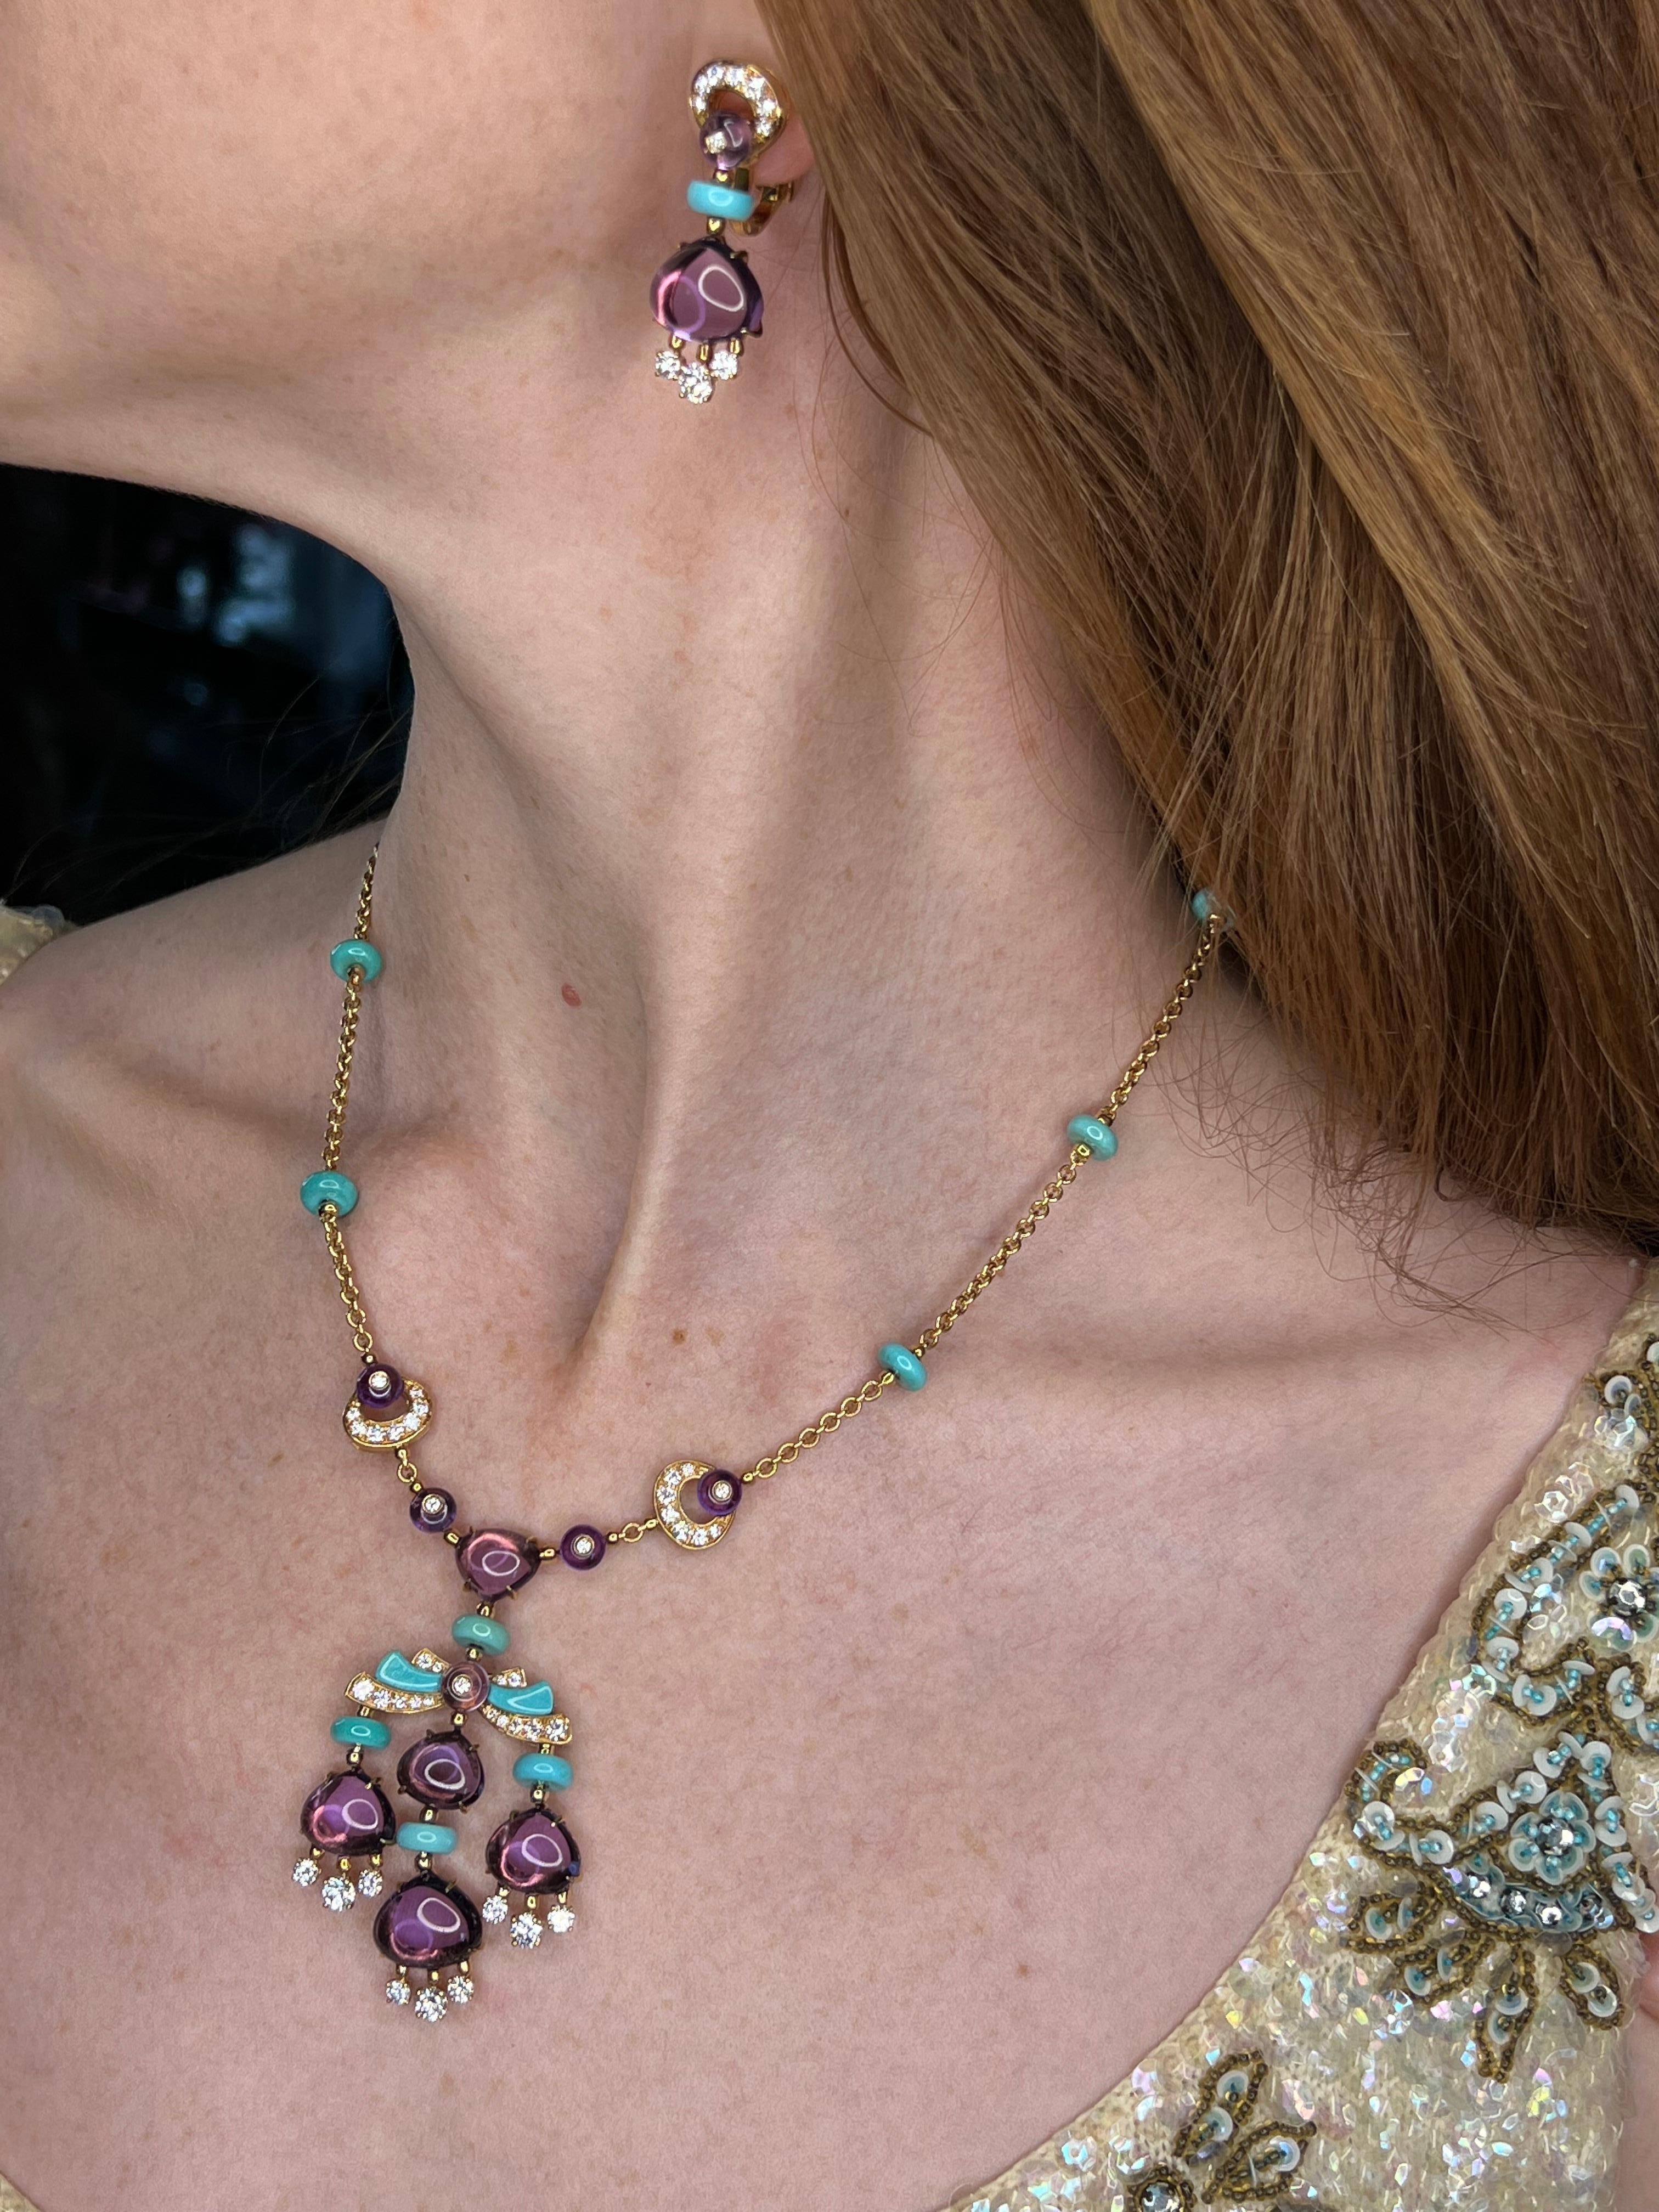 Offered here is a Bulgari Mediterranean Eden Collection Amethyst, Diamond and Turquoise necklace and earrings set in 18kt yellow gold.
Hallmarked Bulgari , manufacturing numbers,  750    Made in Italy.
Length ………………………….. Adjustable 15.5 to 17